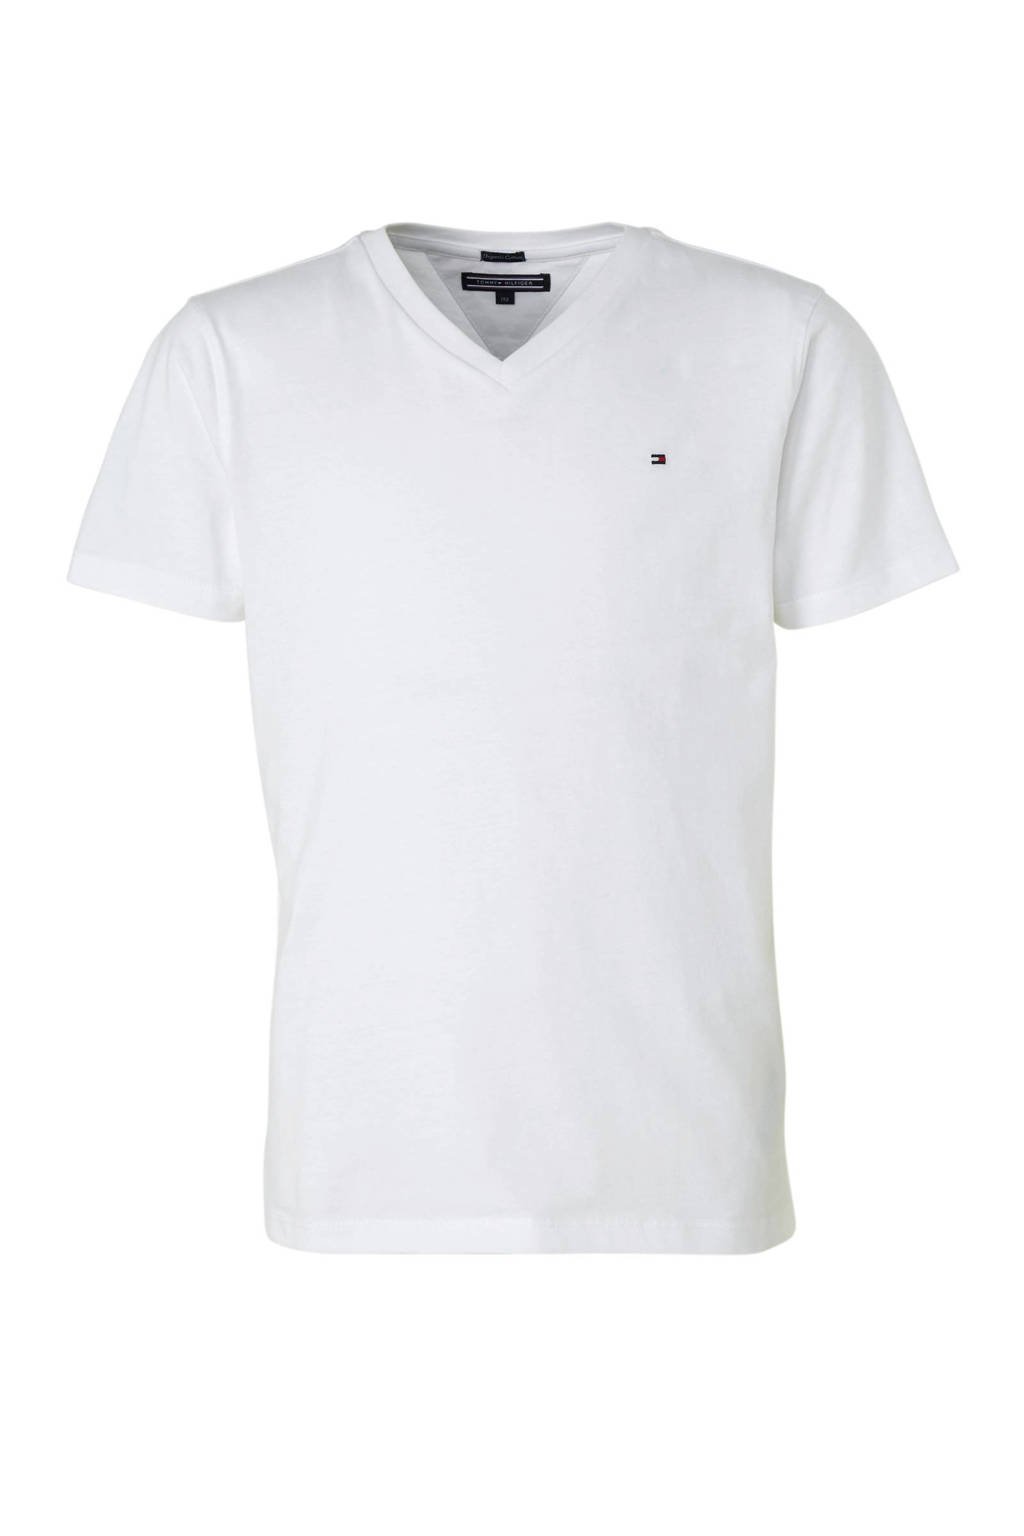 wees gegroet Wacht even onderpand Tommy Hilfiger T-shirt wit | wehkamp